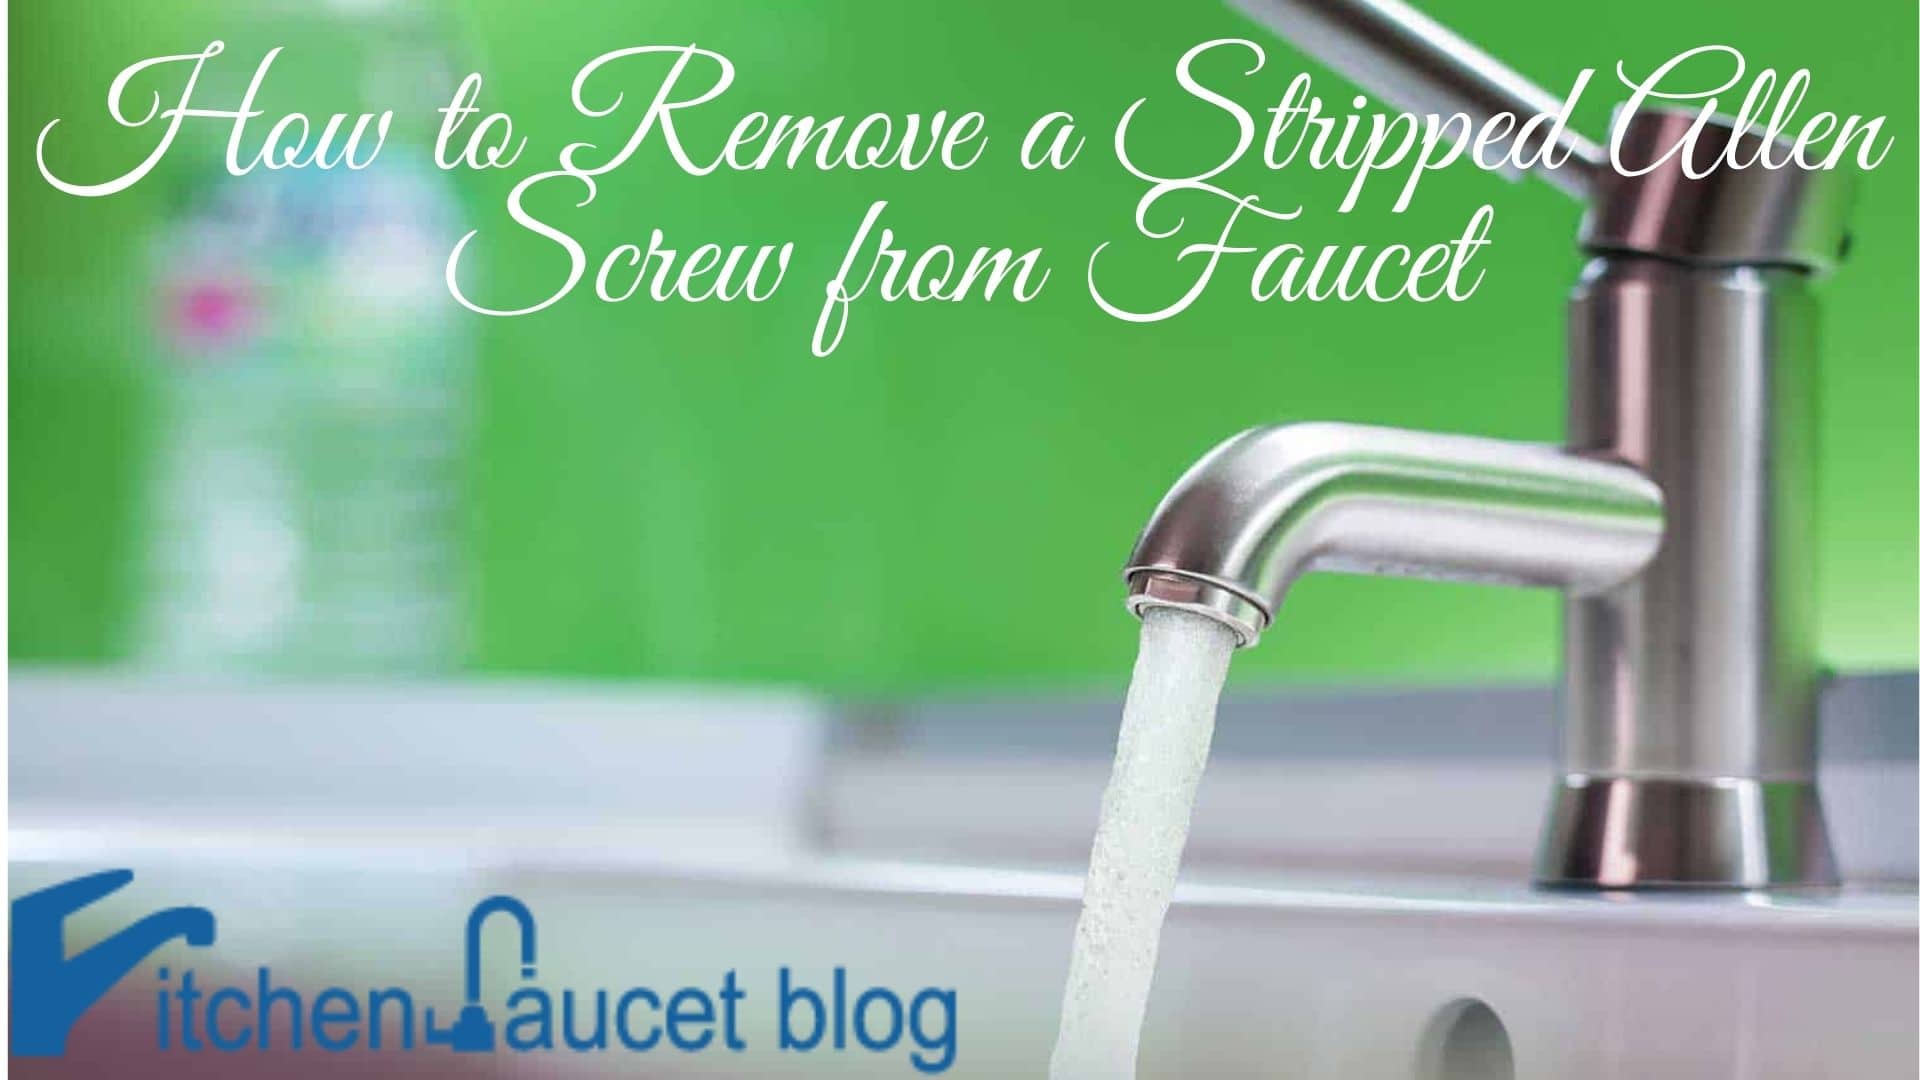 How to Remove a Stripped Allen Screw from Faucet